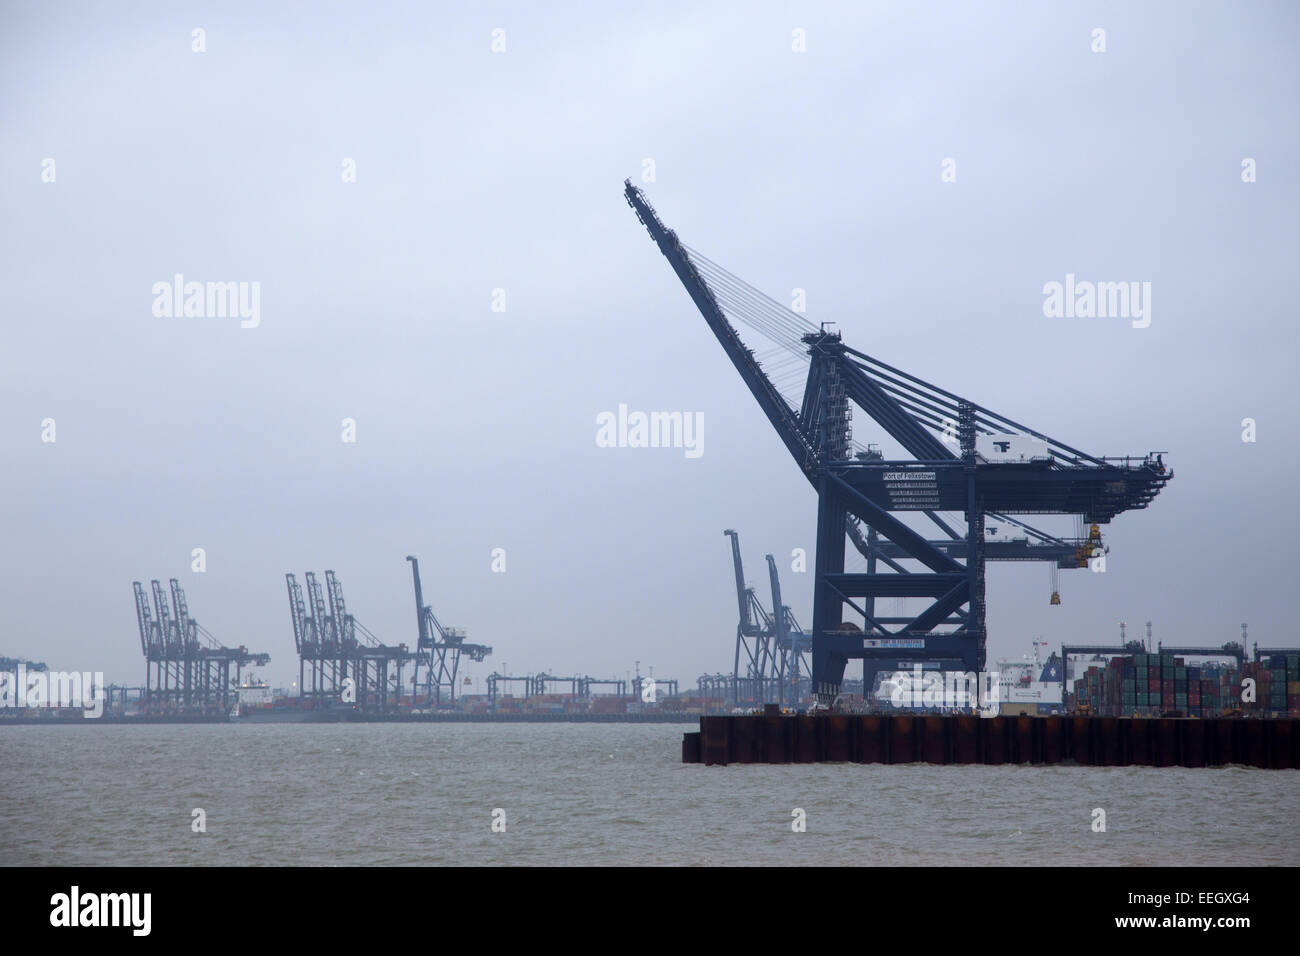 A view of the Port of Felixstowe on a grey January day Stock Photo